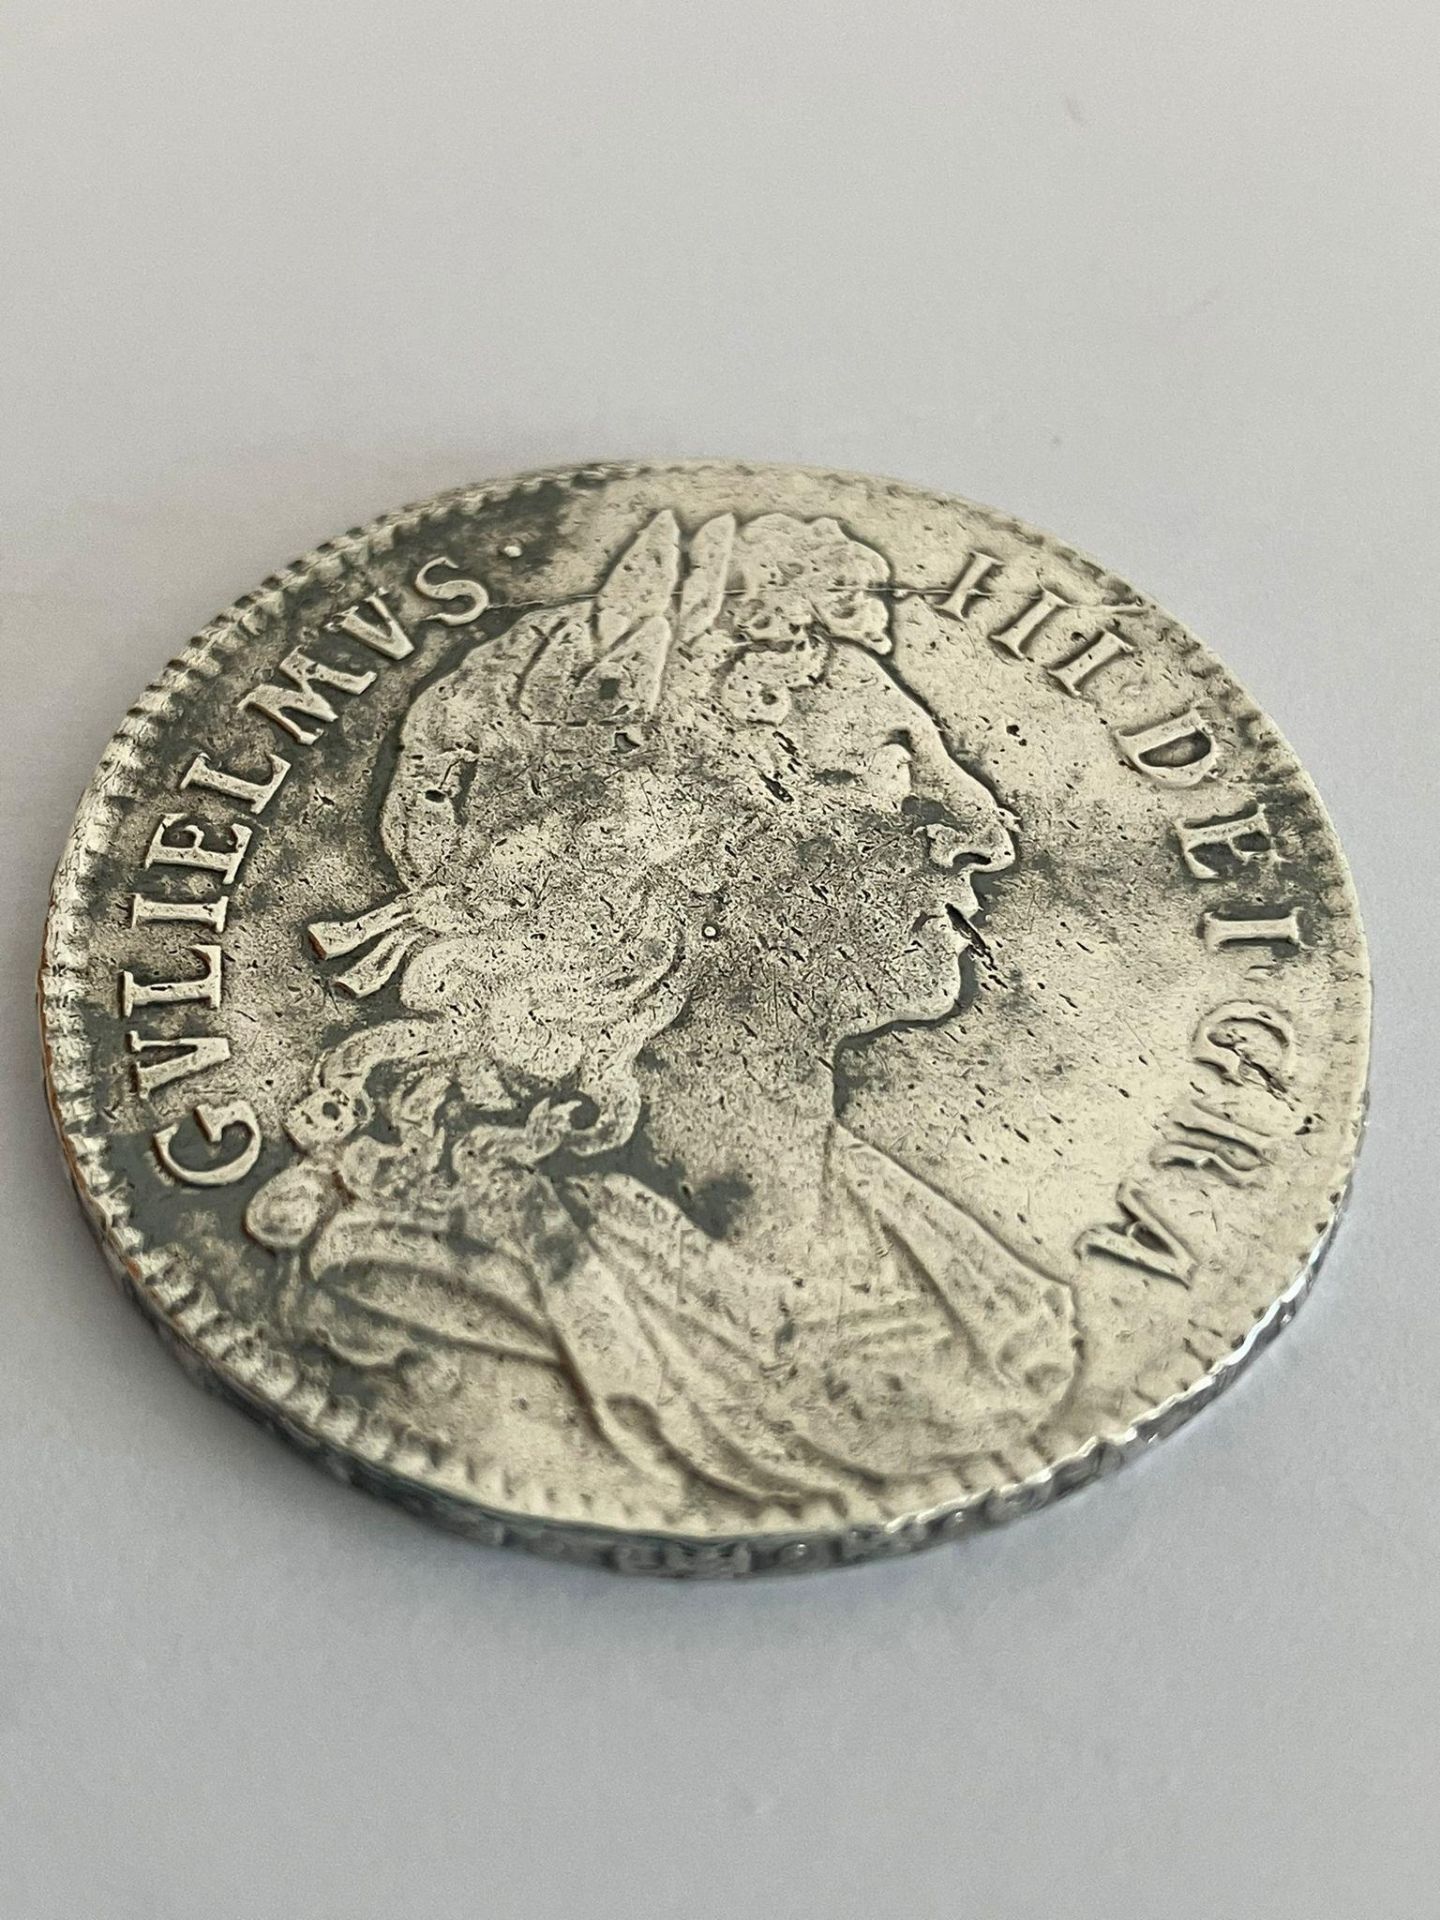 1696 WILLIAM III (William of Orange) SILVER HALF CROWN. Condition very fine or better. Clear - Image 2 of 2